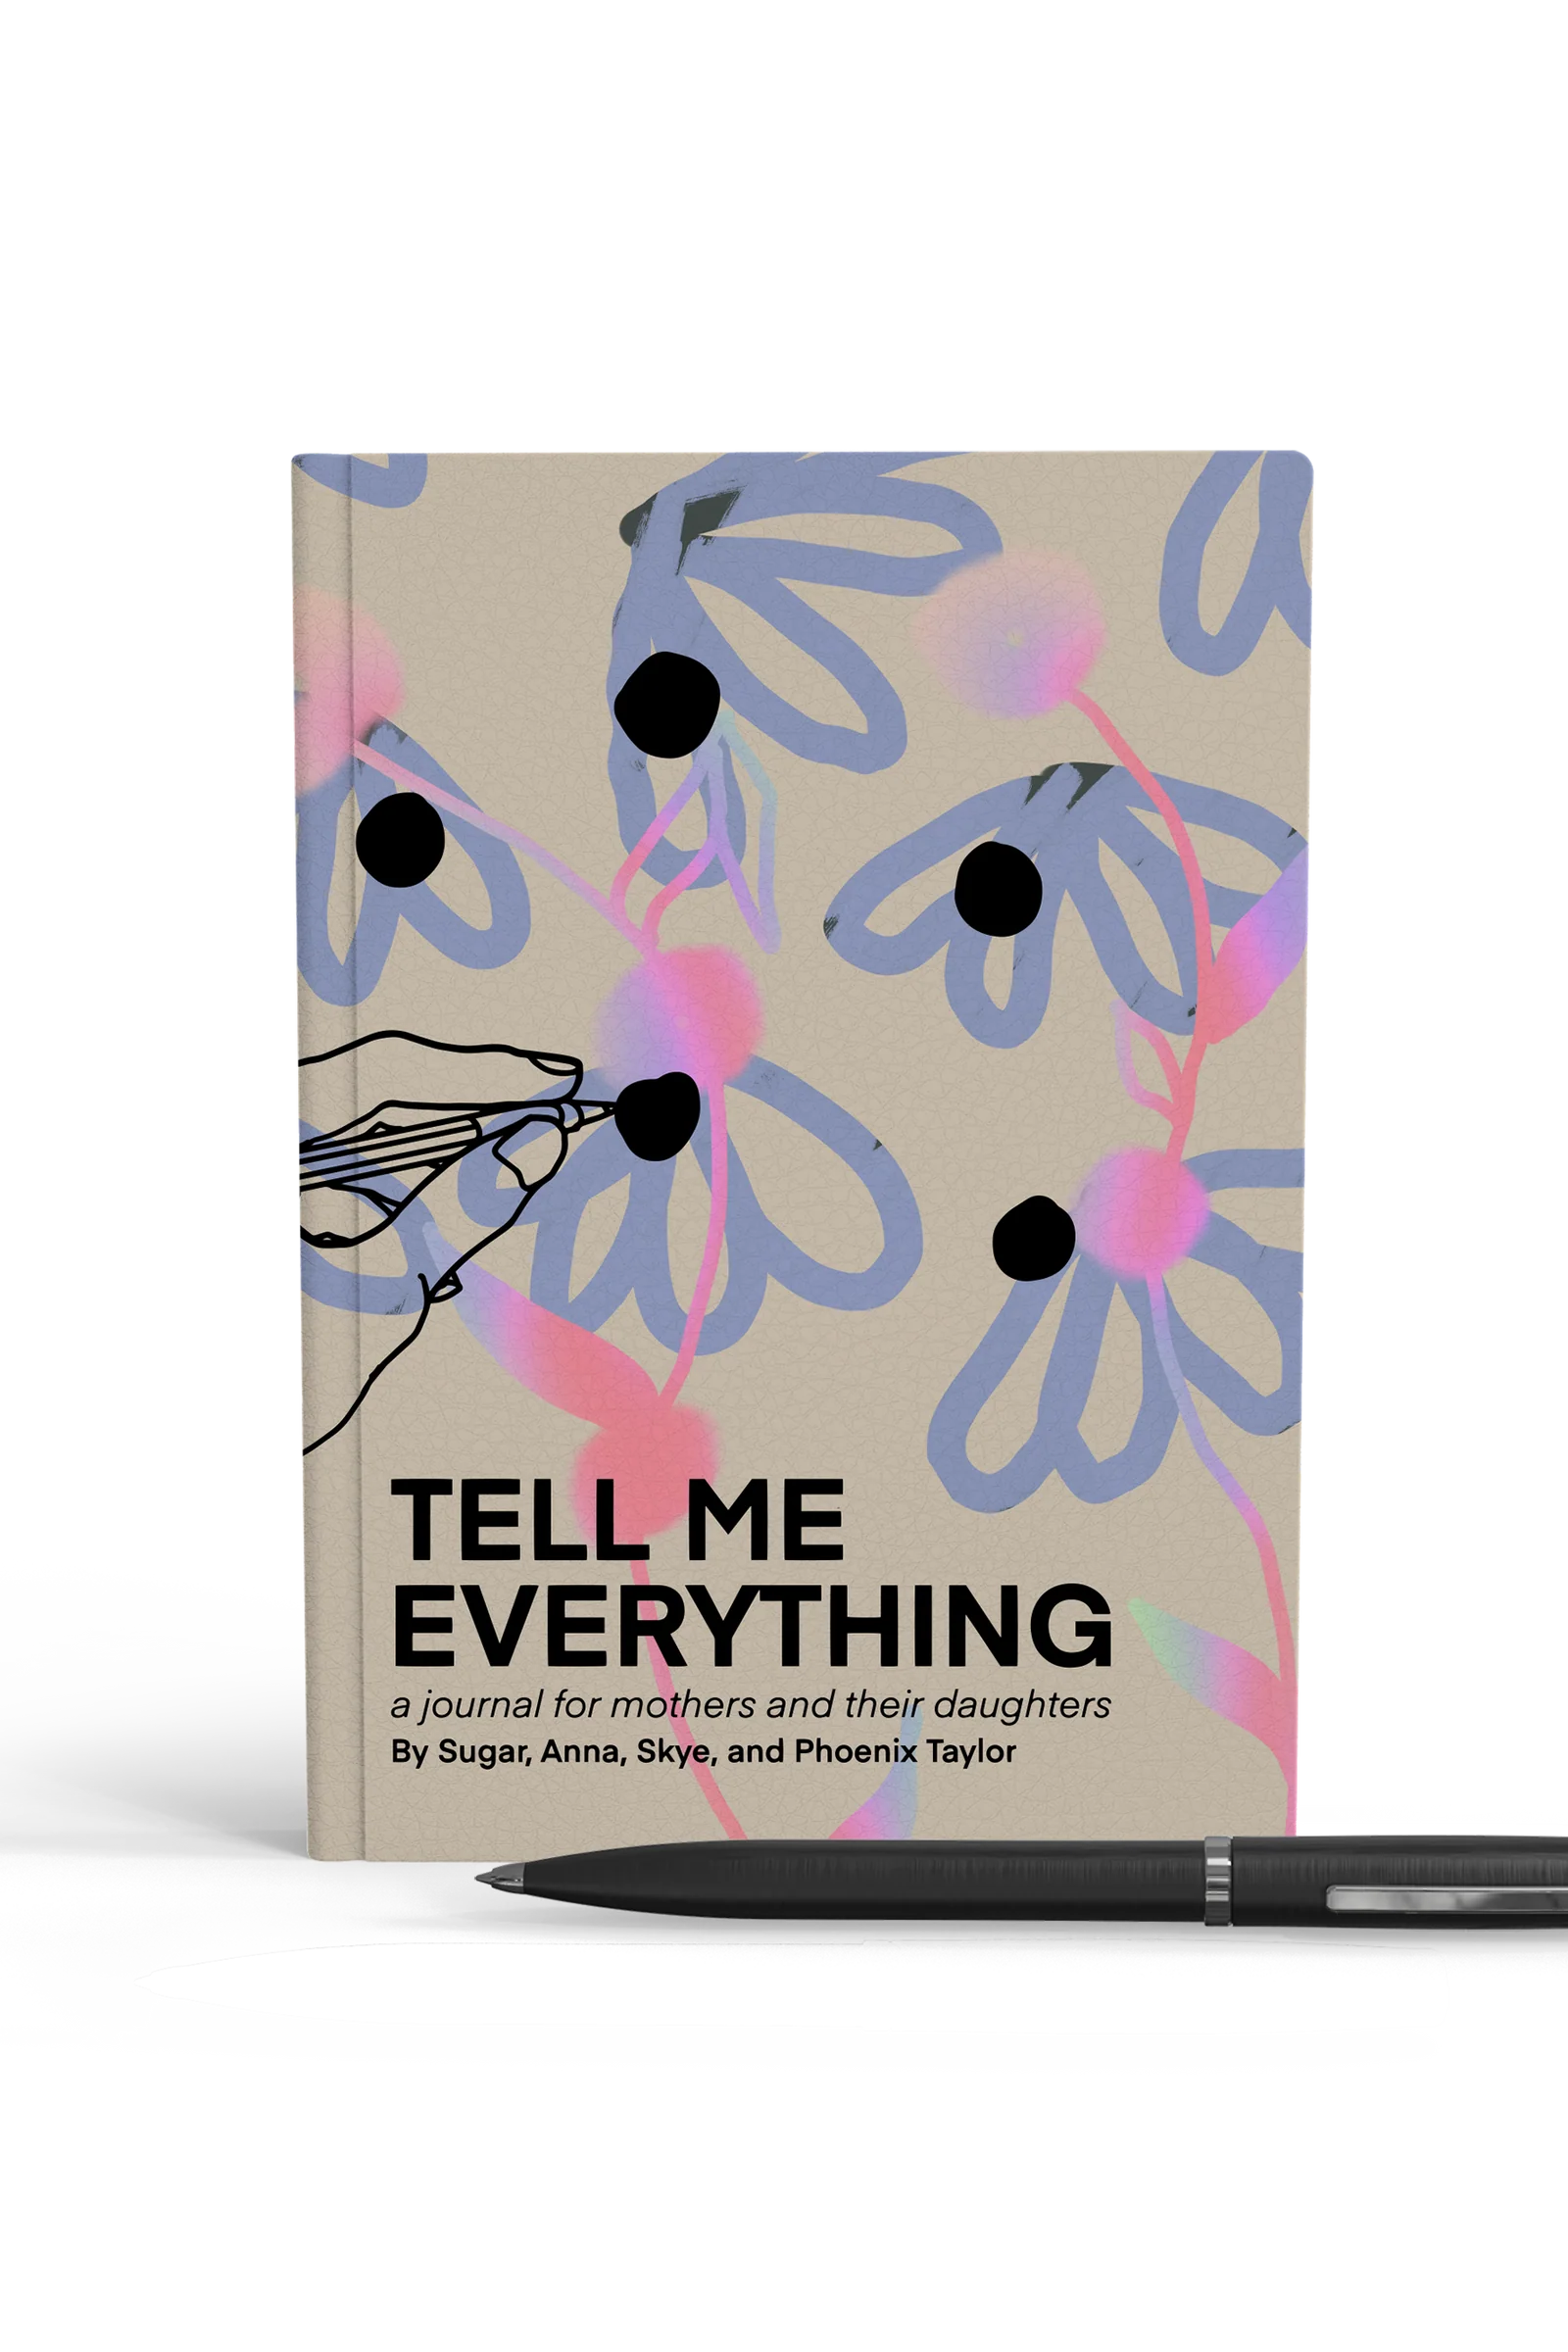 JOURNAL TELL ME EVERYTHING MOTHER DAUGHTER JOURNAL